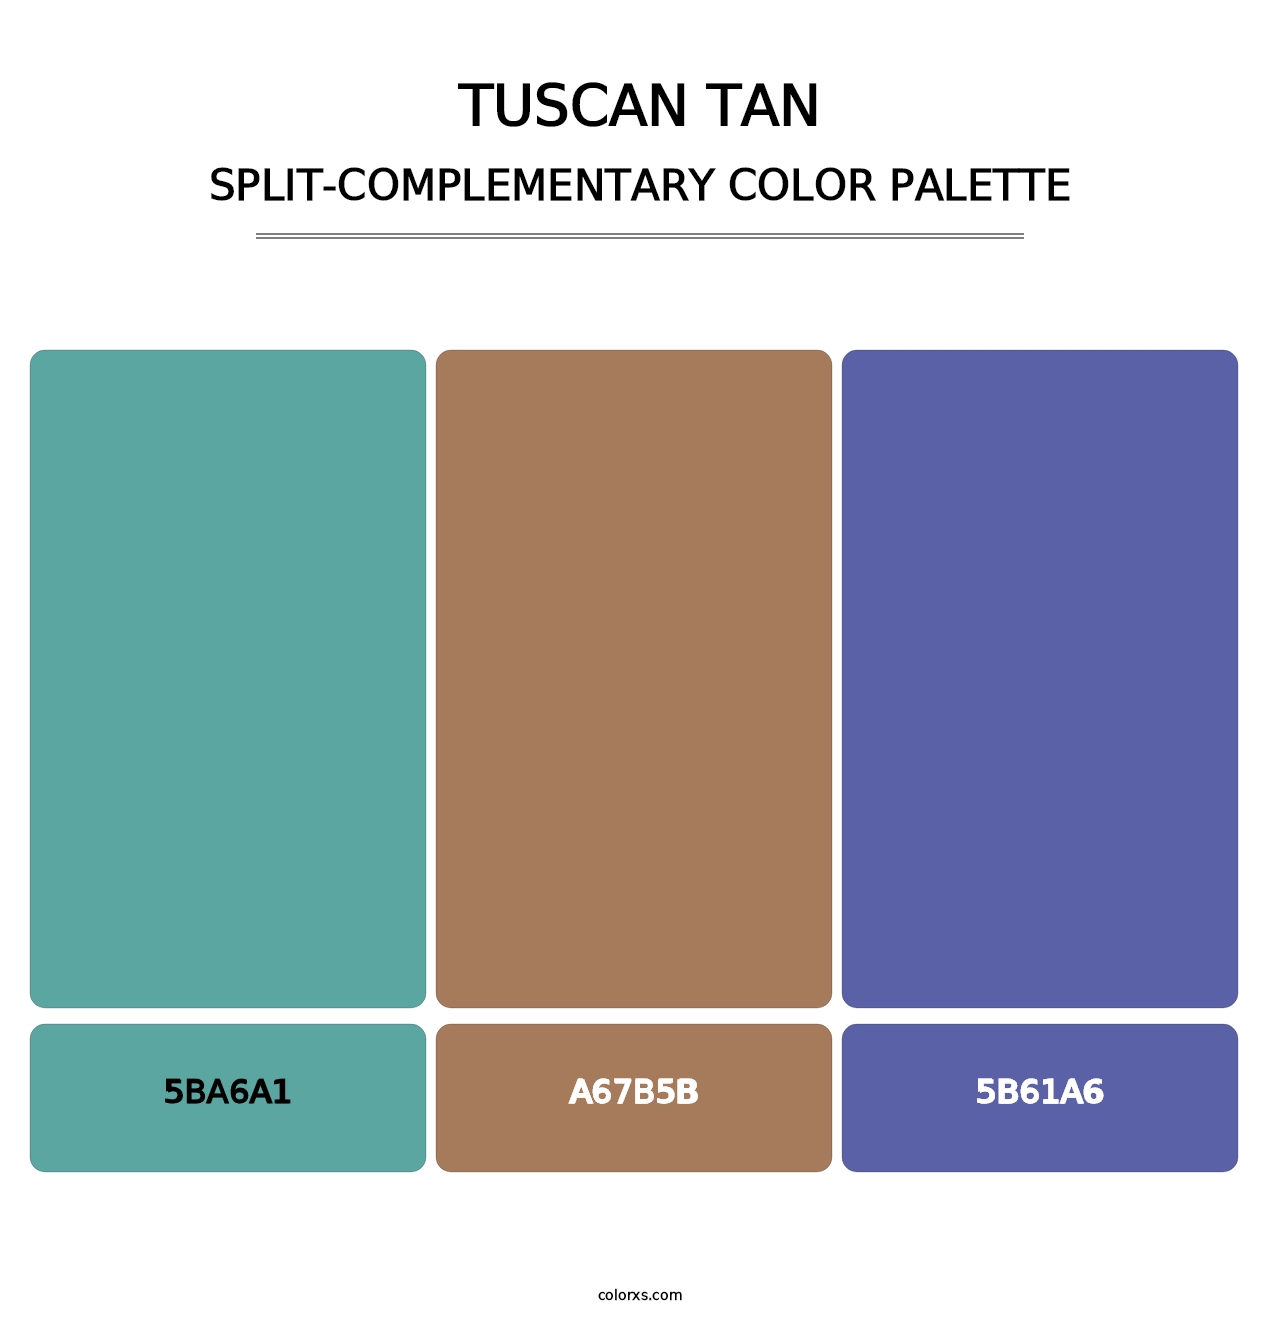 Tuscan Tan - Split-Complementary Color Palette